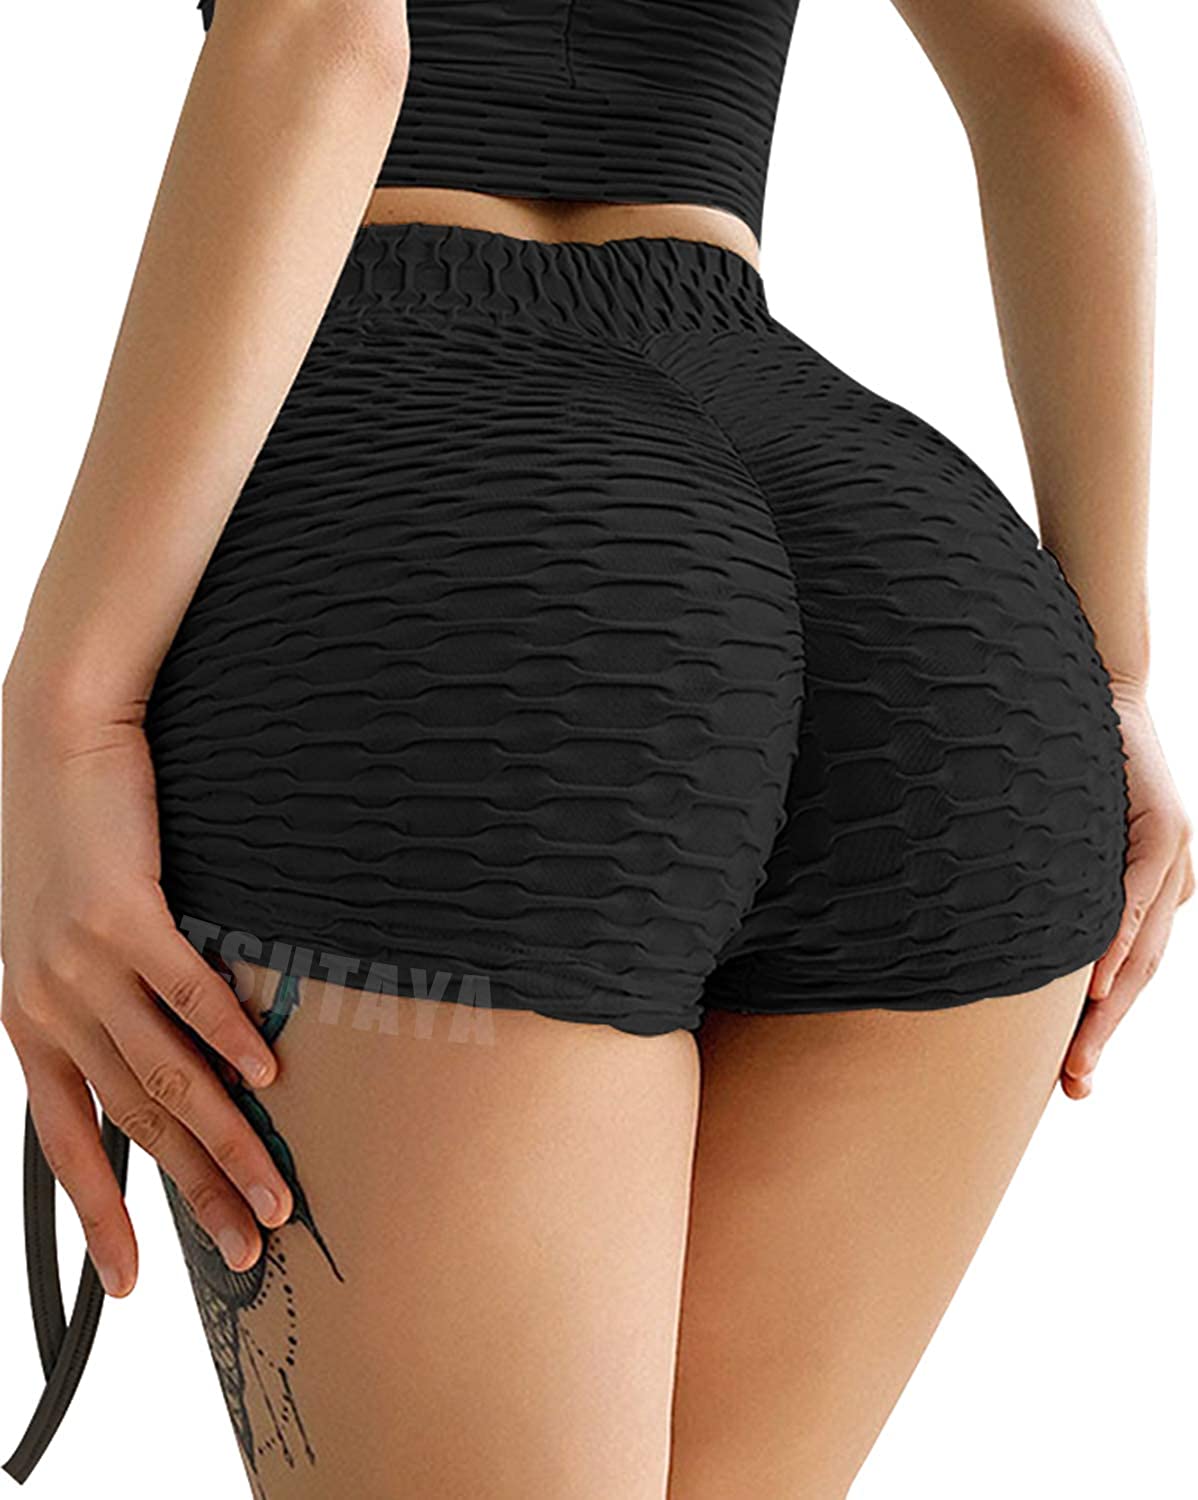 Womens Push Up Yoga Shorts Tummy Contral Sports Booty Gym Fitness Hot Pants 